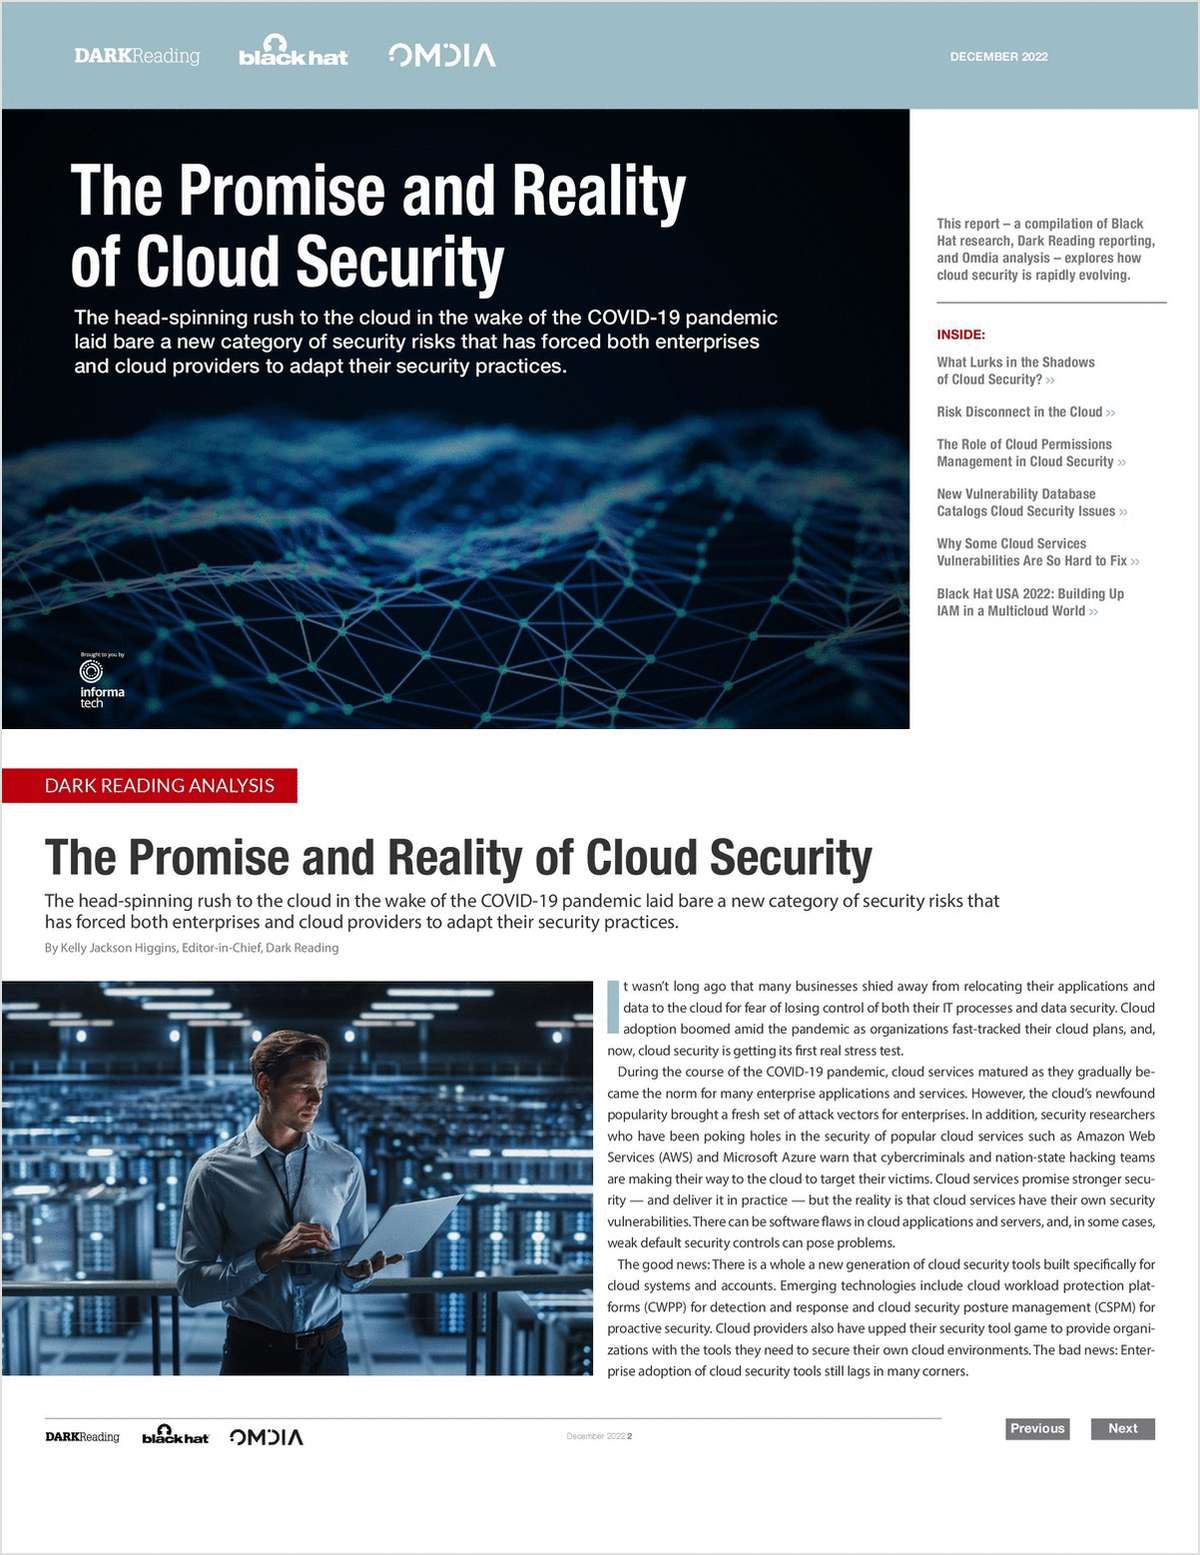 The Promise and Reality of Cloud Security